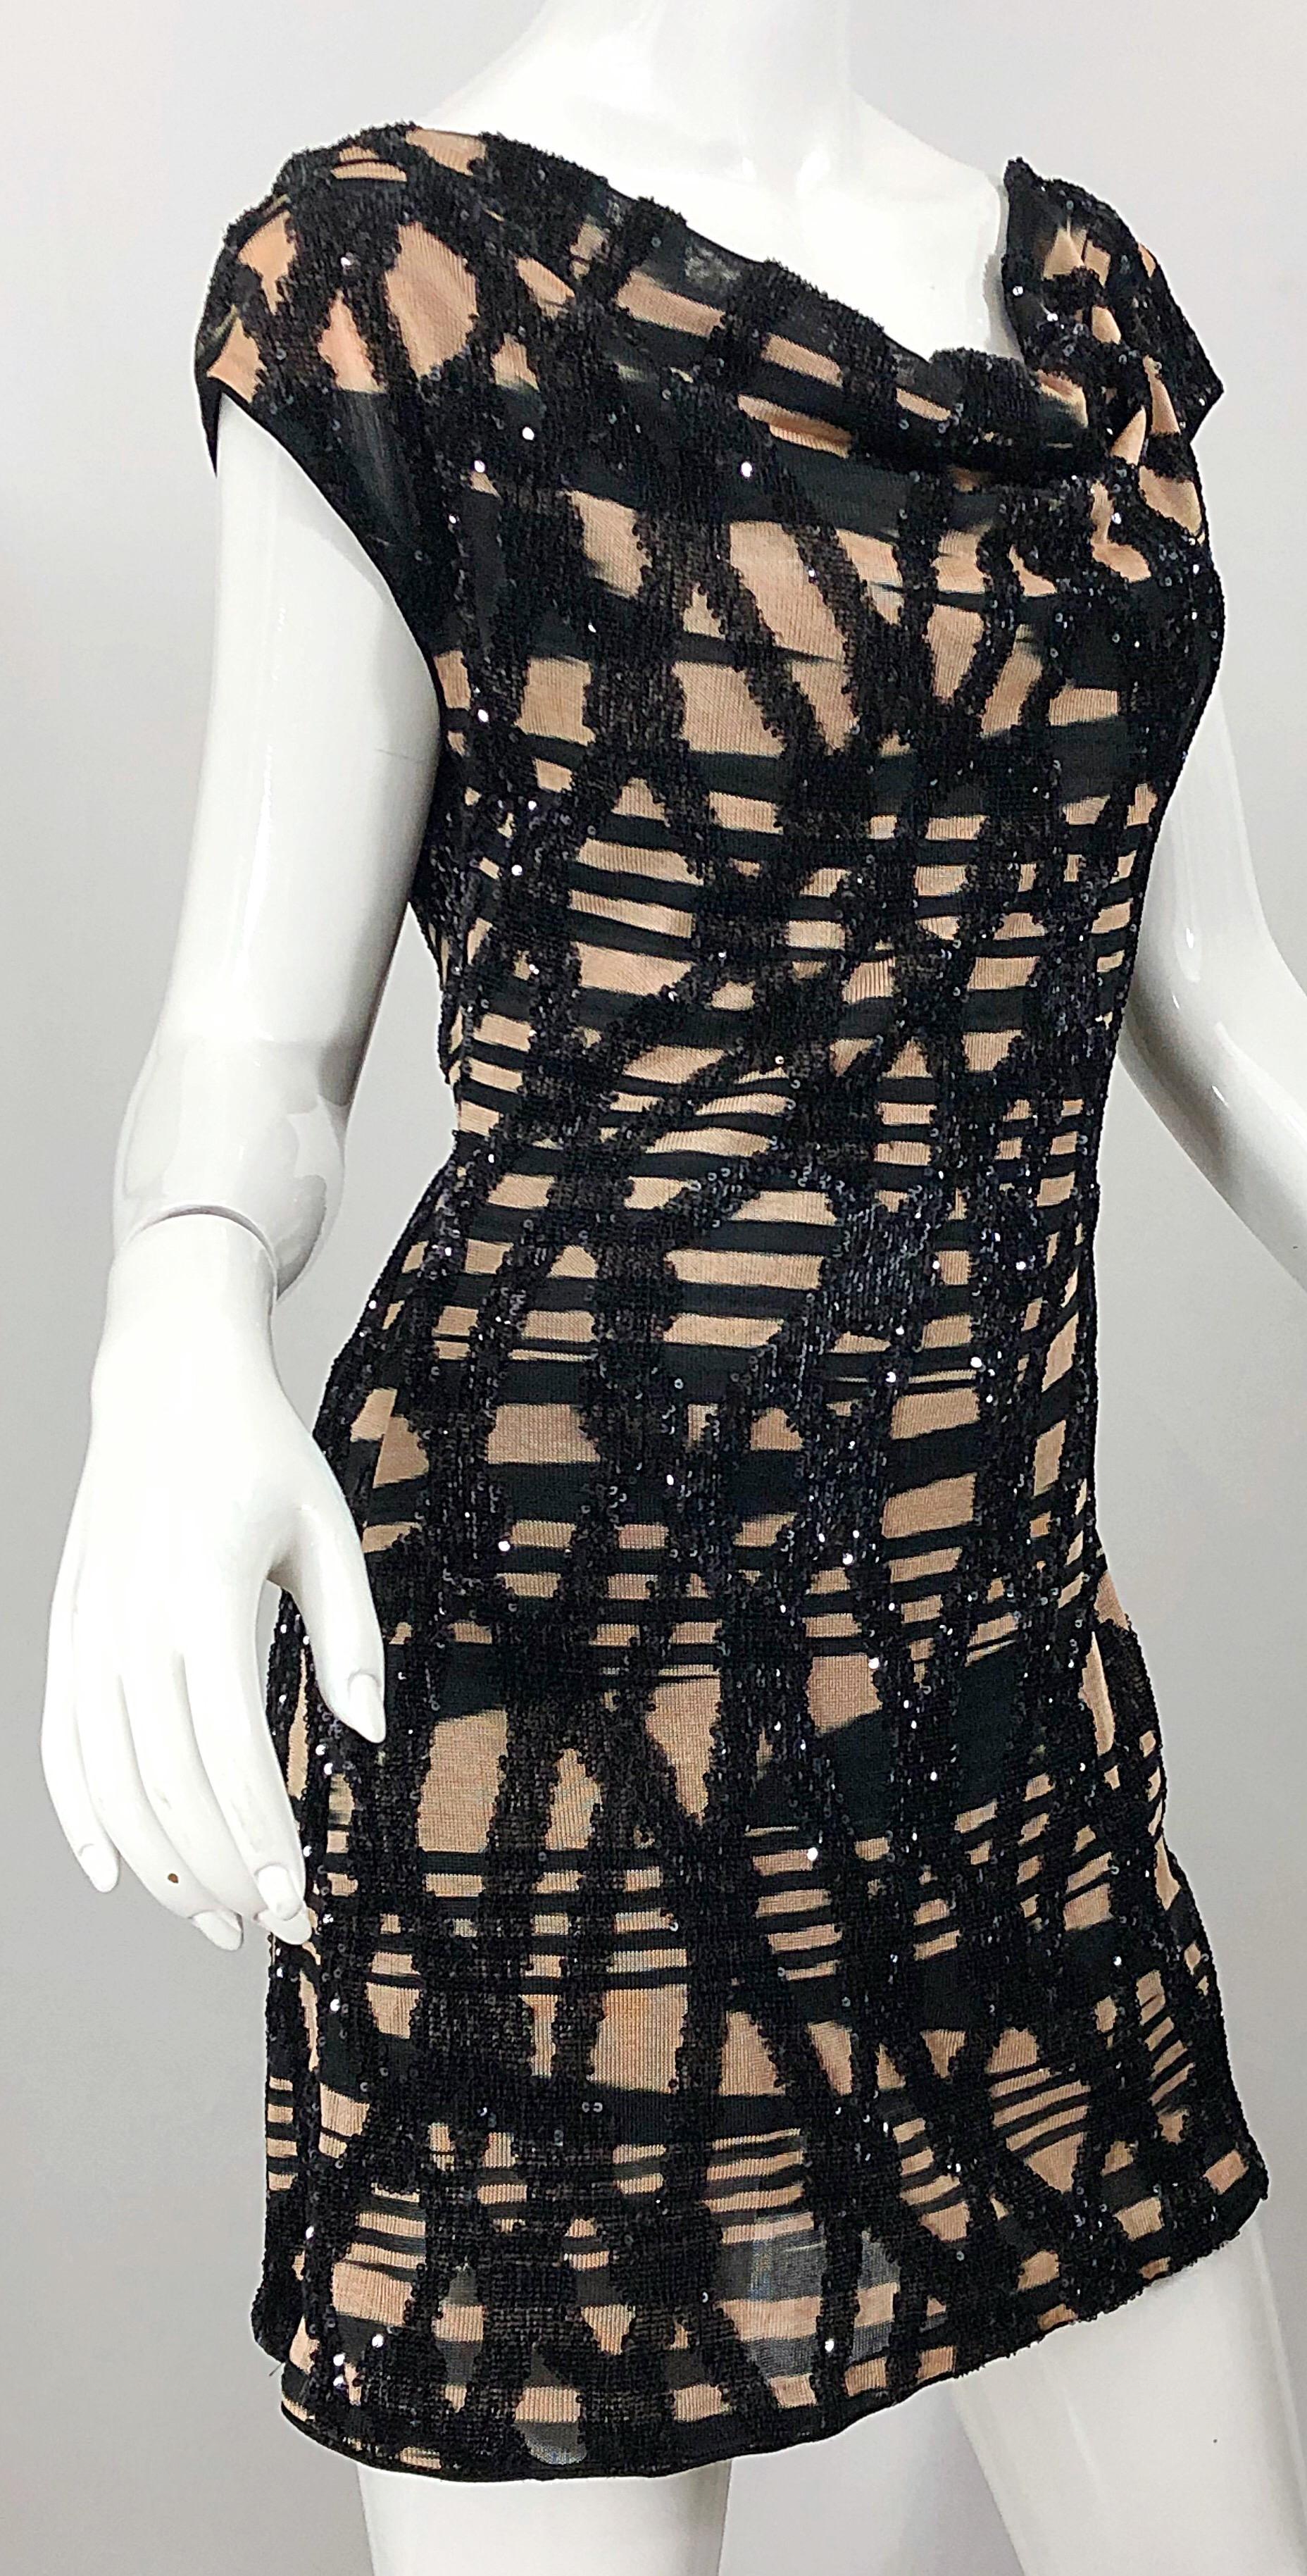 Women's Missoni Early 2000s Black + Nude Sequined Size 40 / 4 - 6 Abstract Mini Dress For Sale